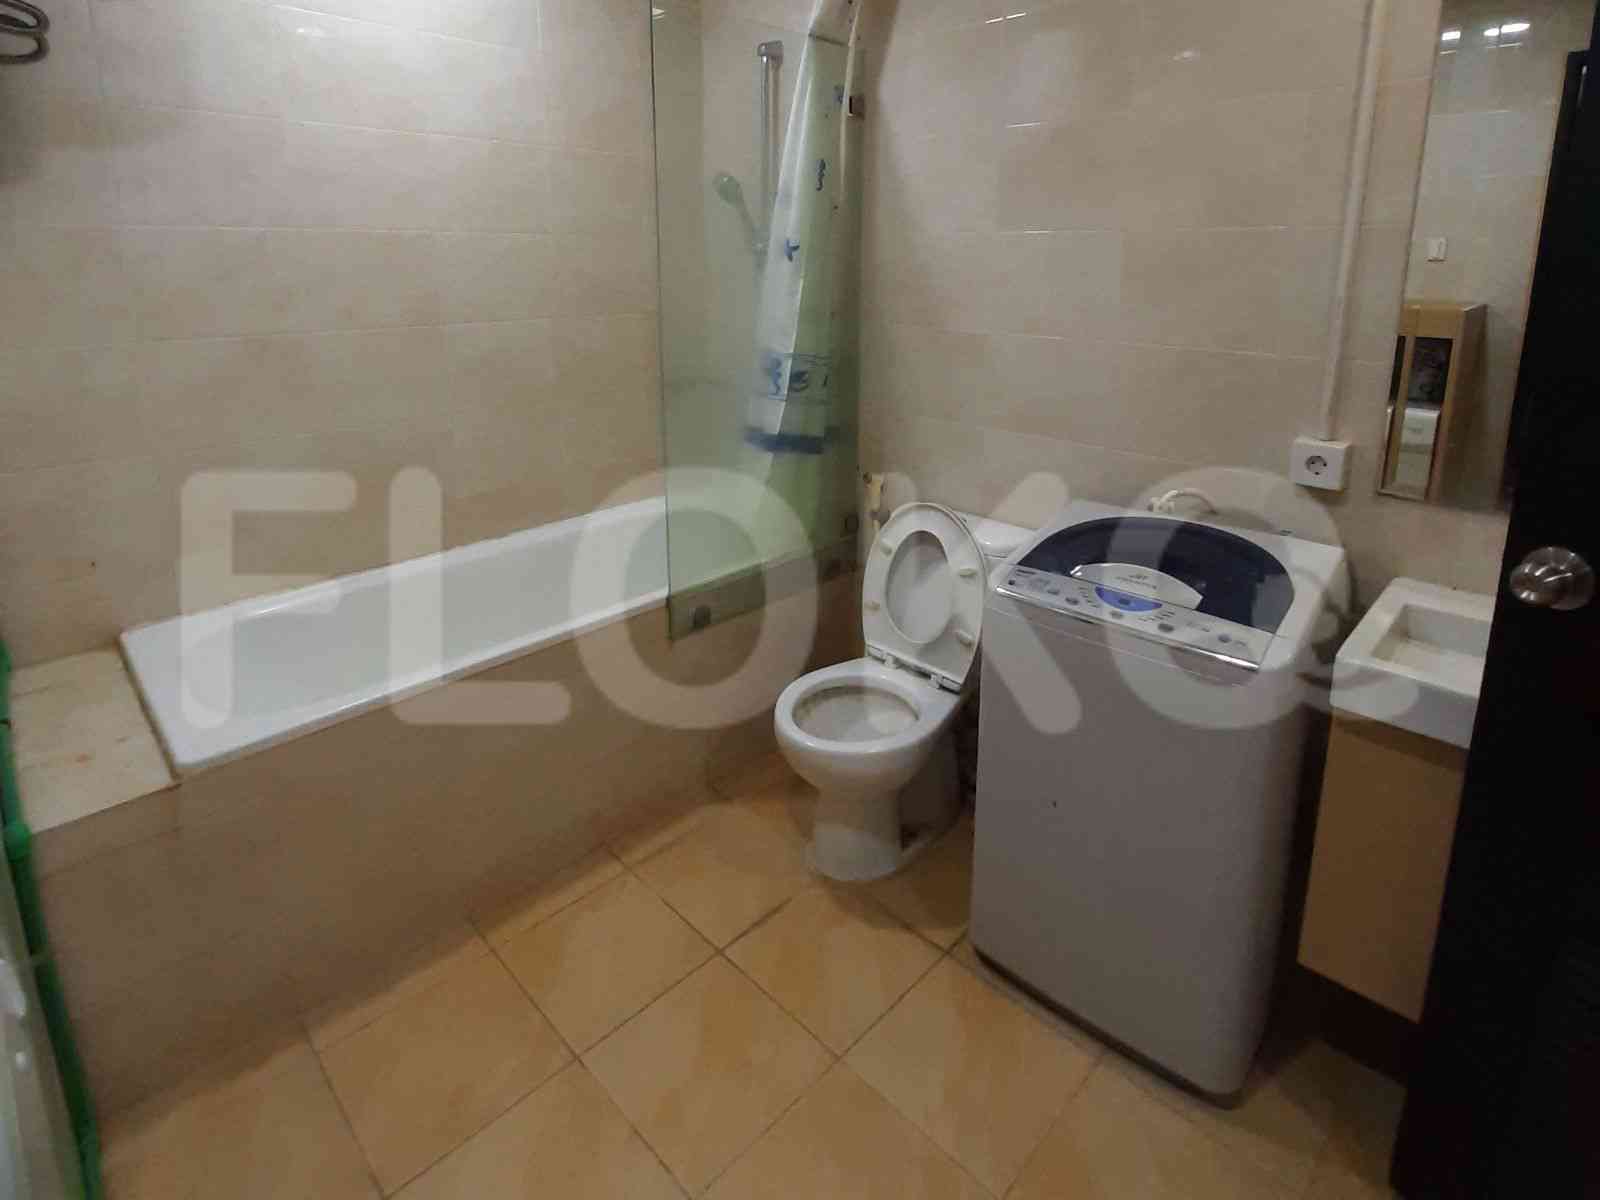 2 Bedroom on 20th Floor for Rent in Essence Darmawangsa Apartment - fcicc6 6